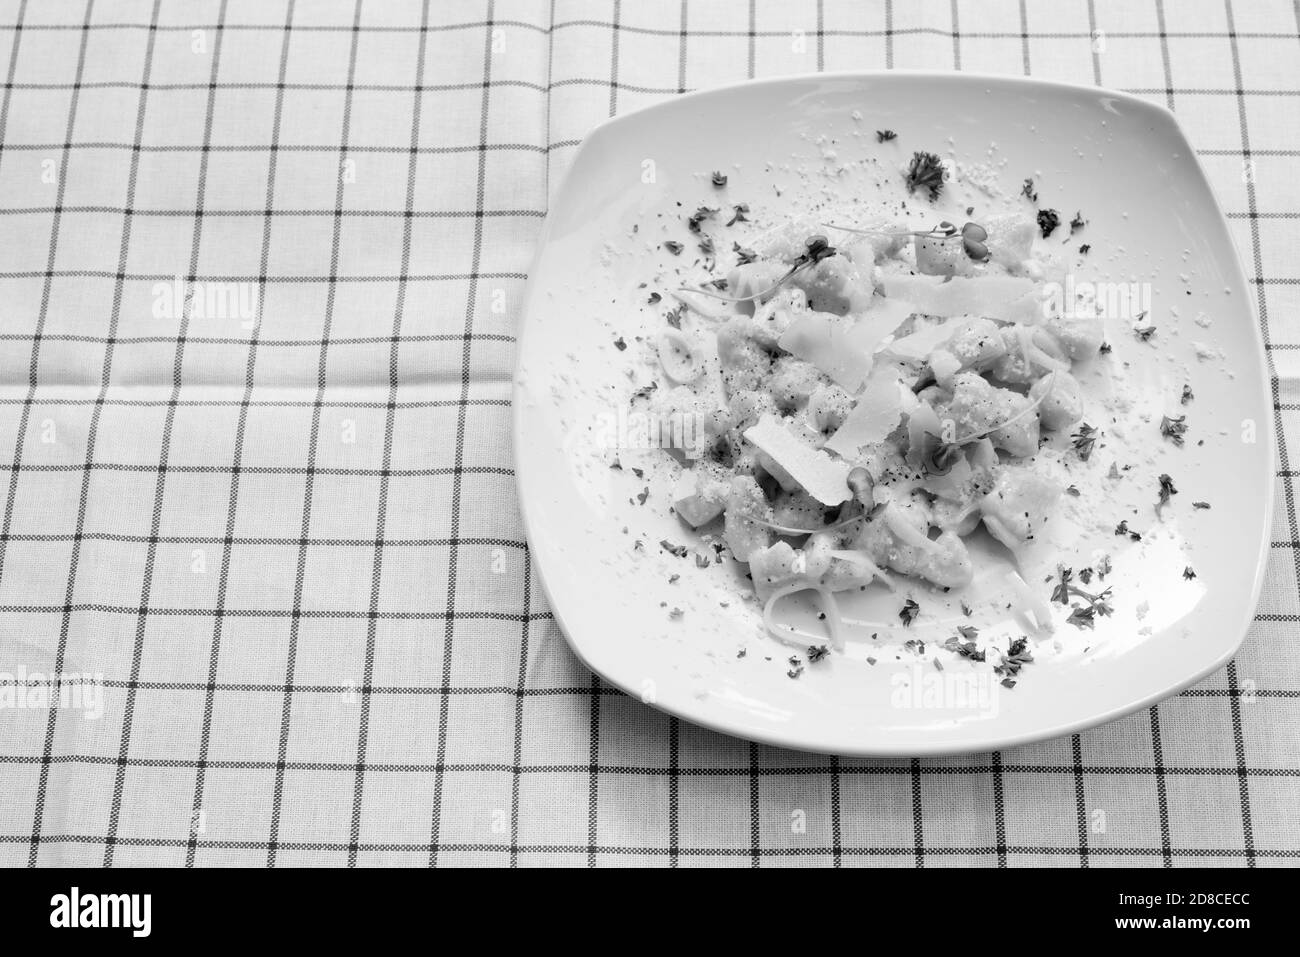 Portrait Of Gnocchi Mixed with Cheese And Cream Stock Photo